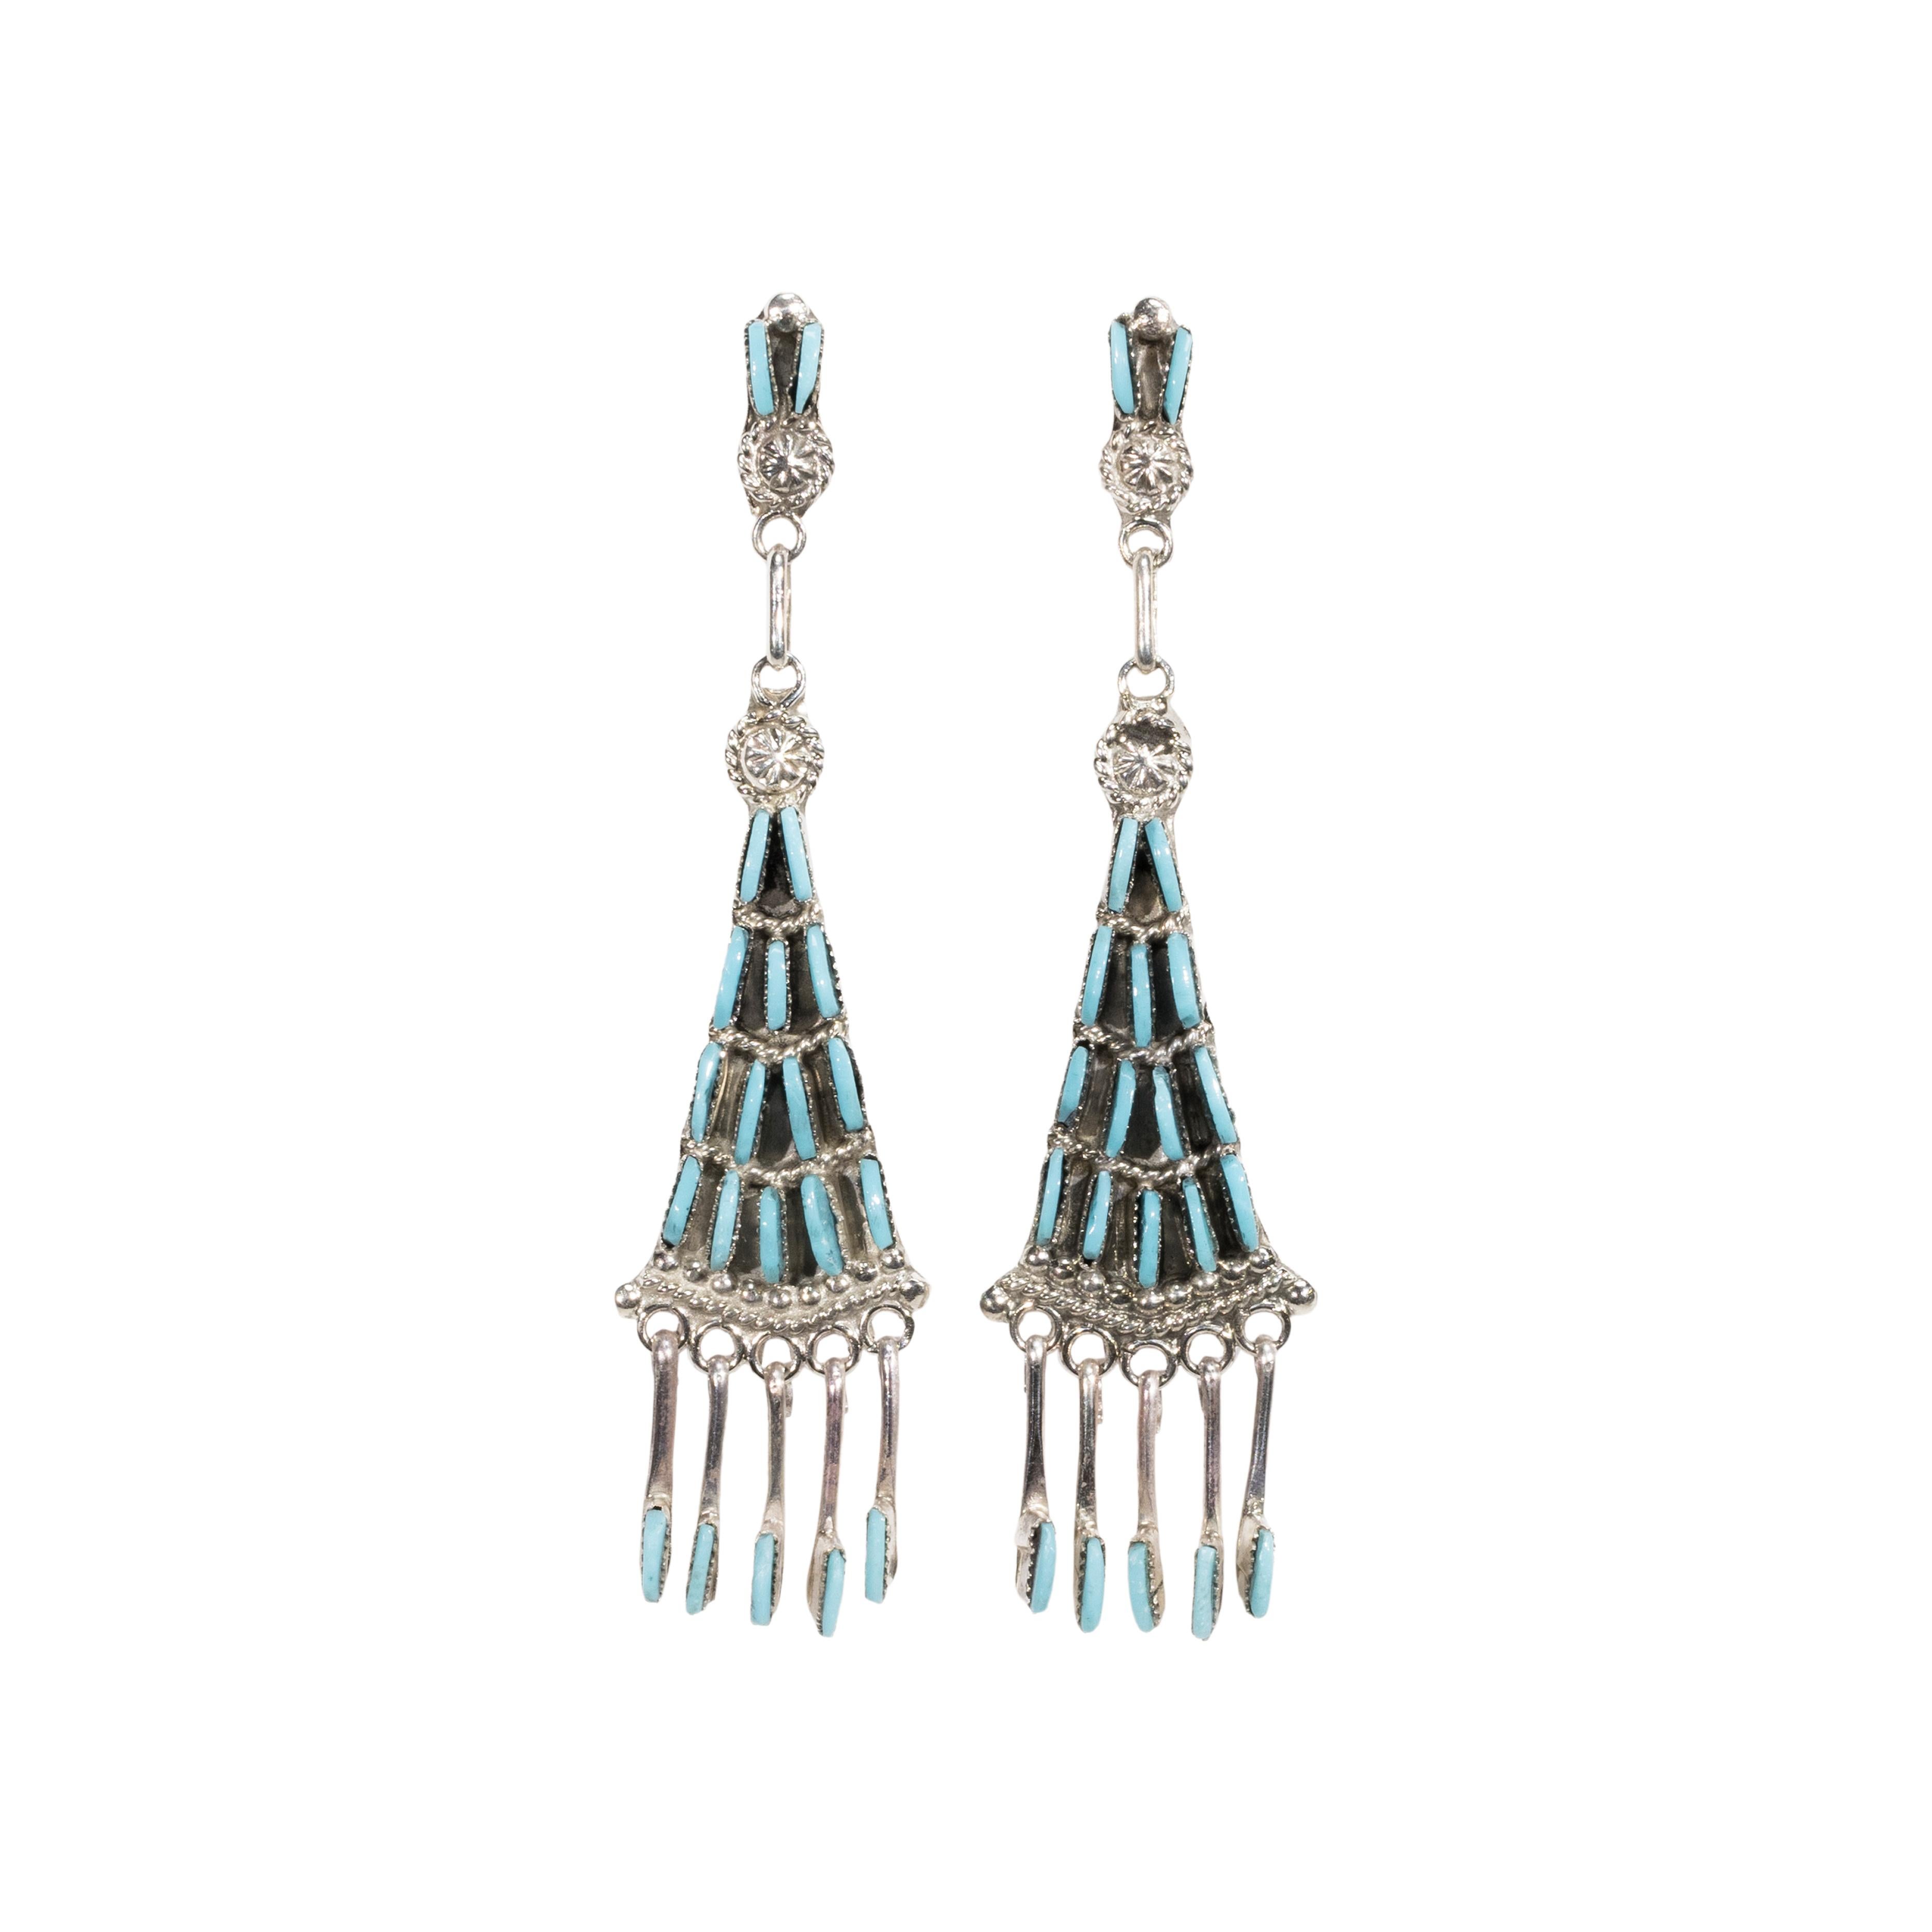 Zuni Sleeping Beauty Turquoise and Sterling Earrings In Good Condition For Sale In Coeur d Alene, ID